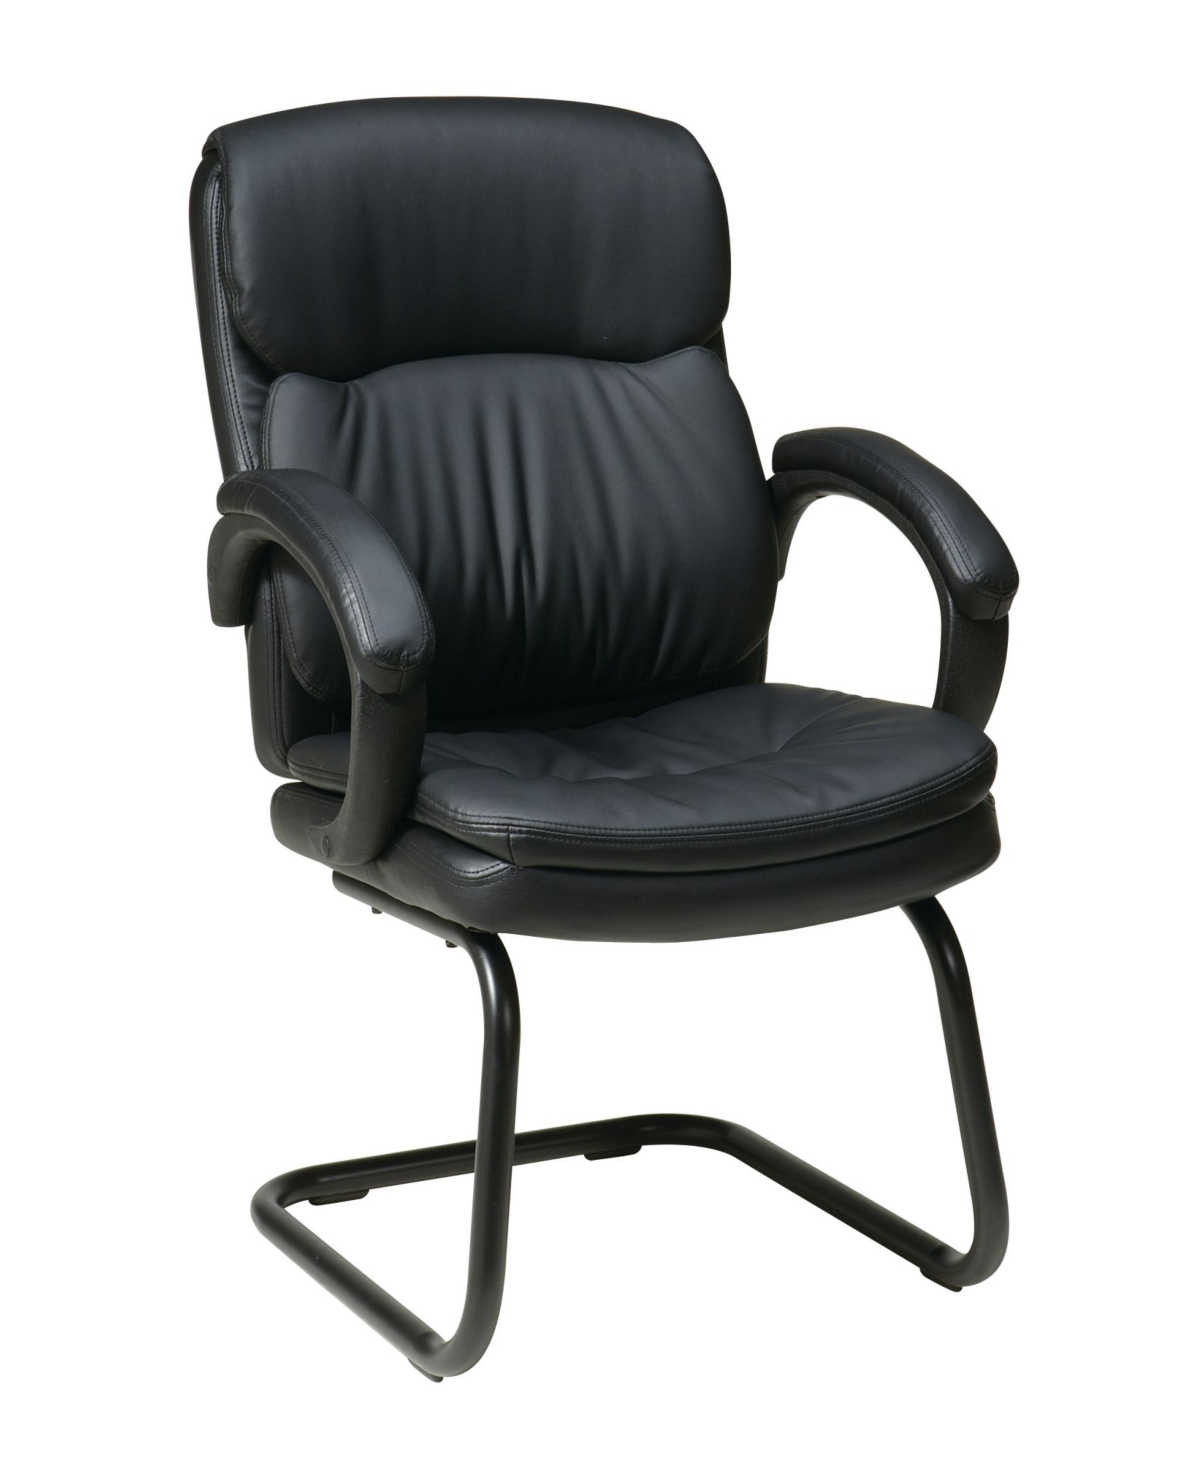 Osp Home Furnishings Bonded Leather Visitors Chair